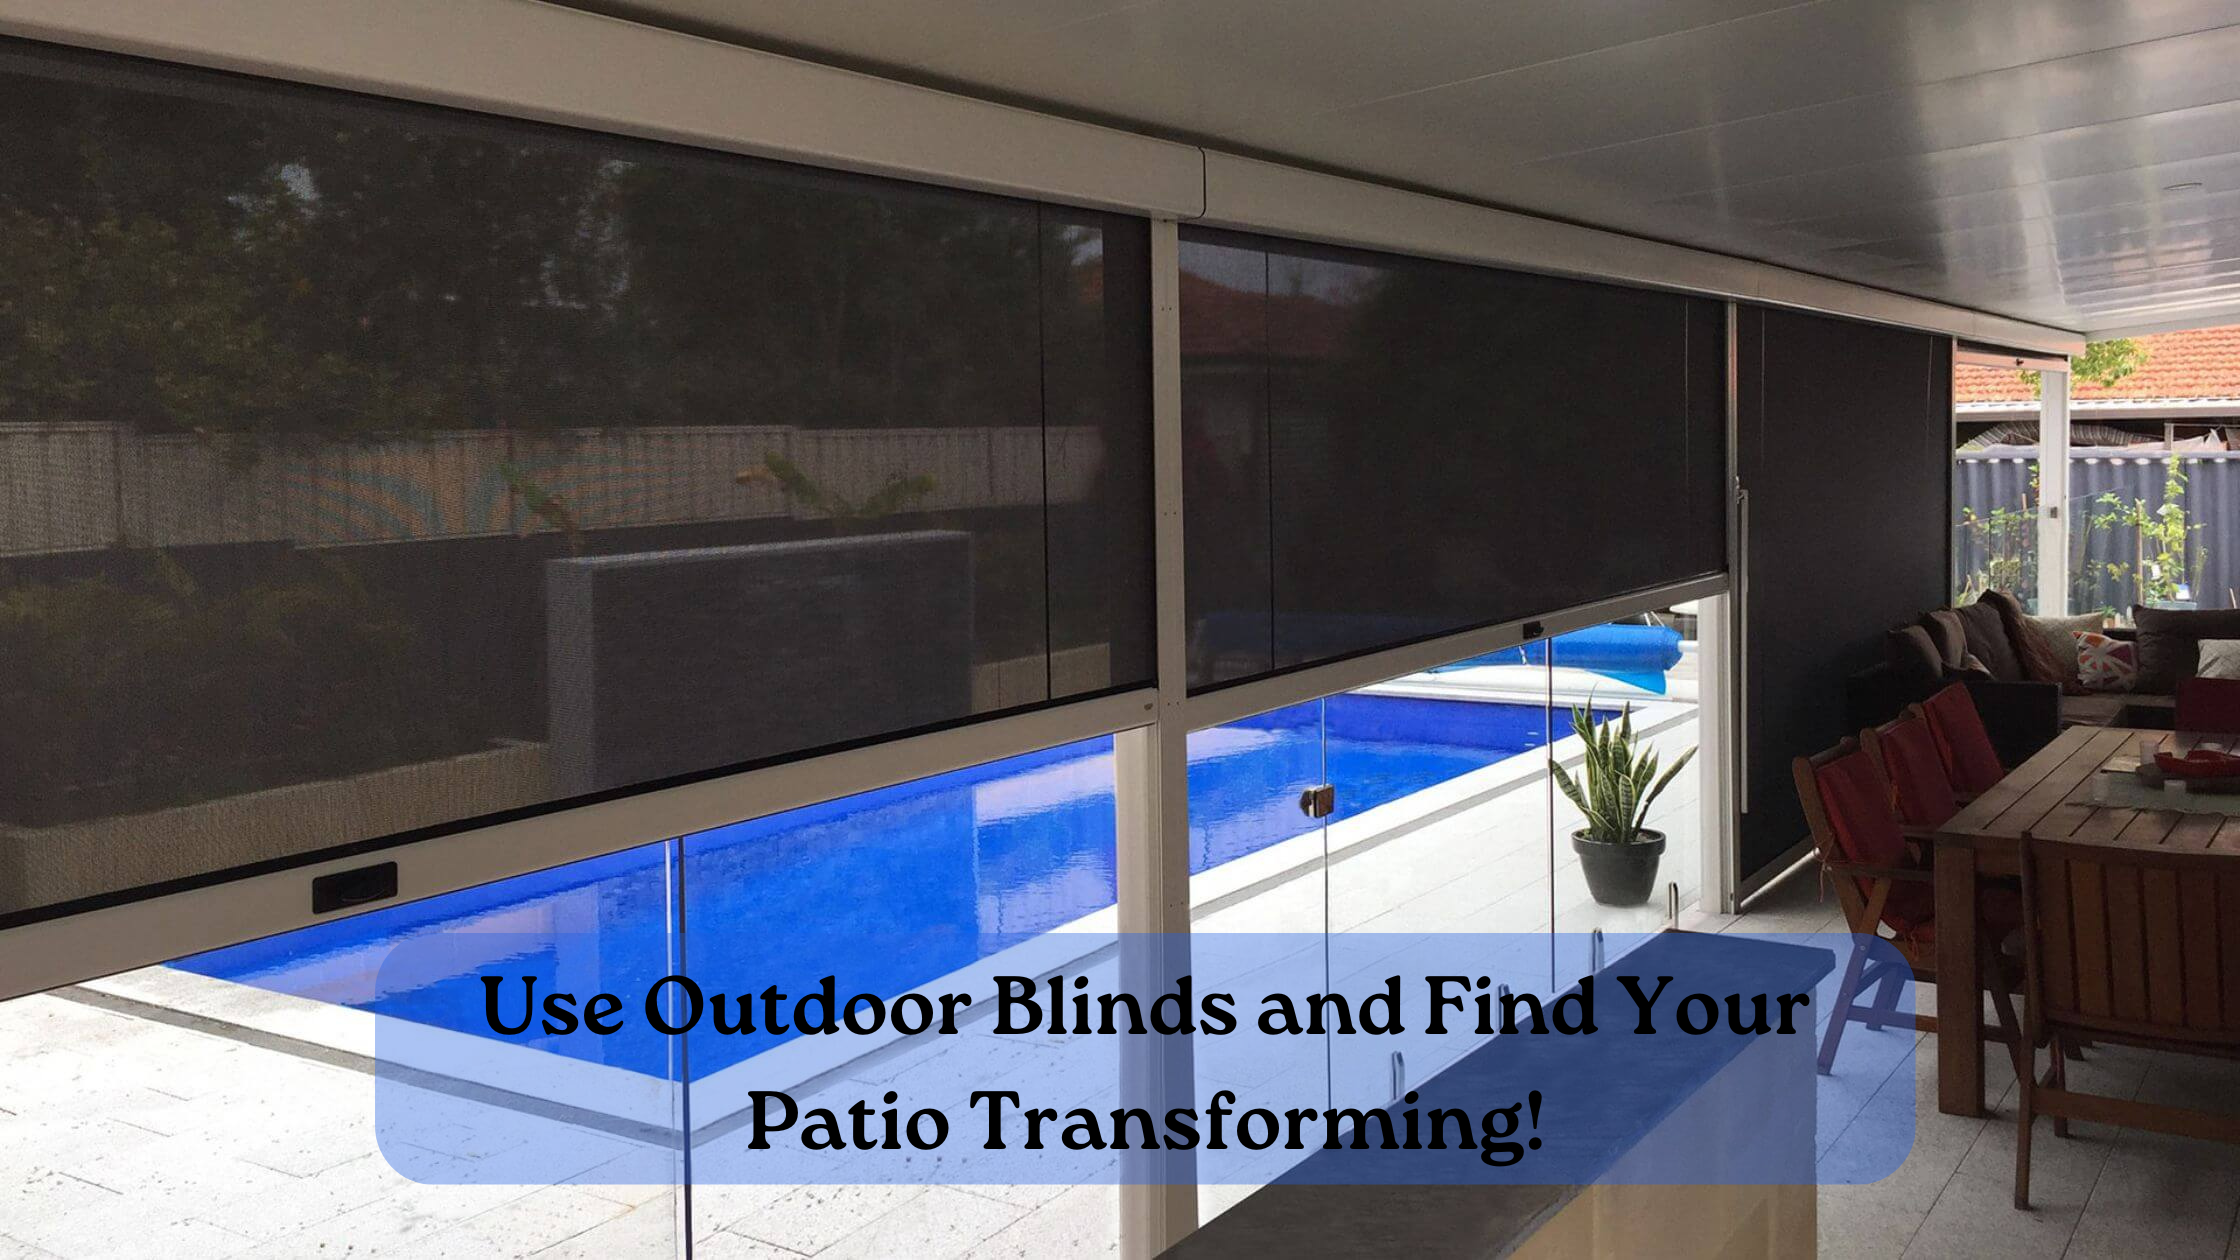 How Can Outdoor Blinds Transform Your Patio and Enhance Outdoor Living?